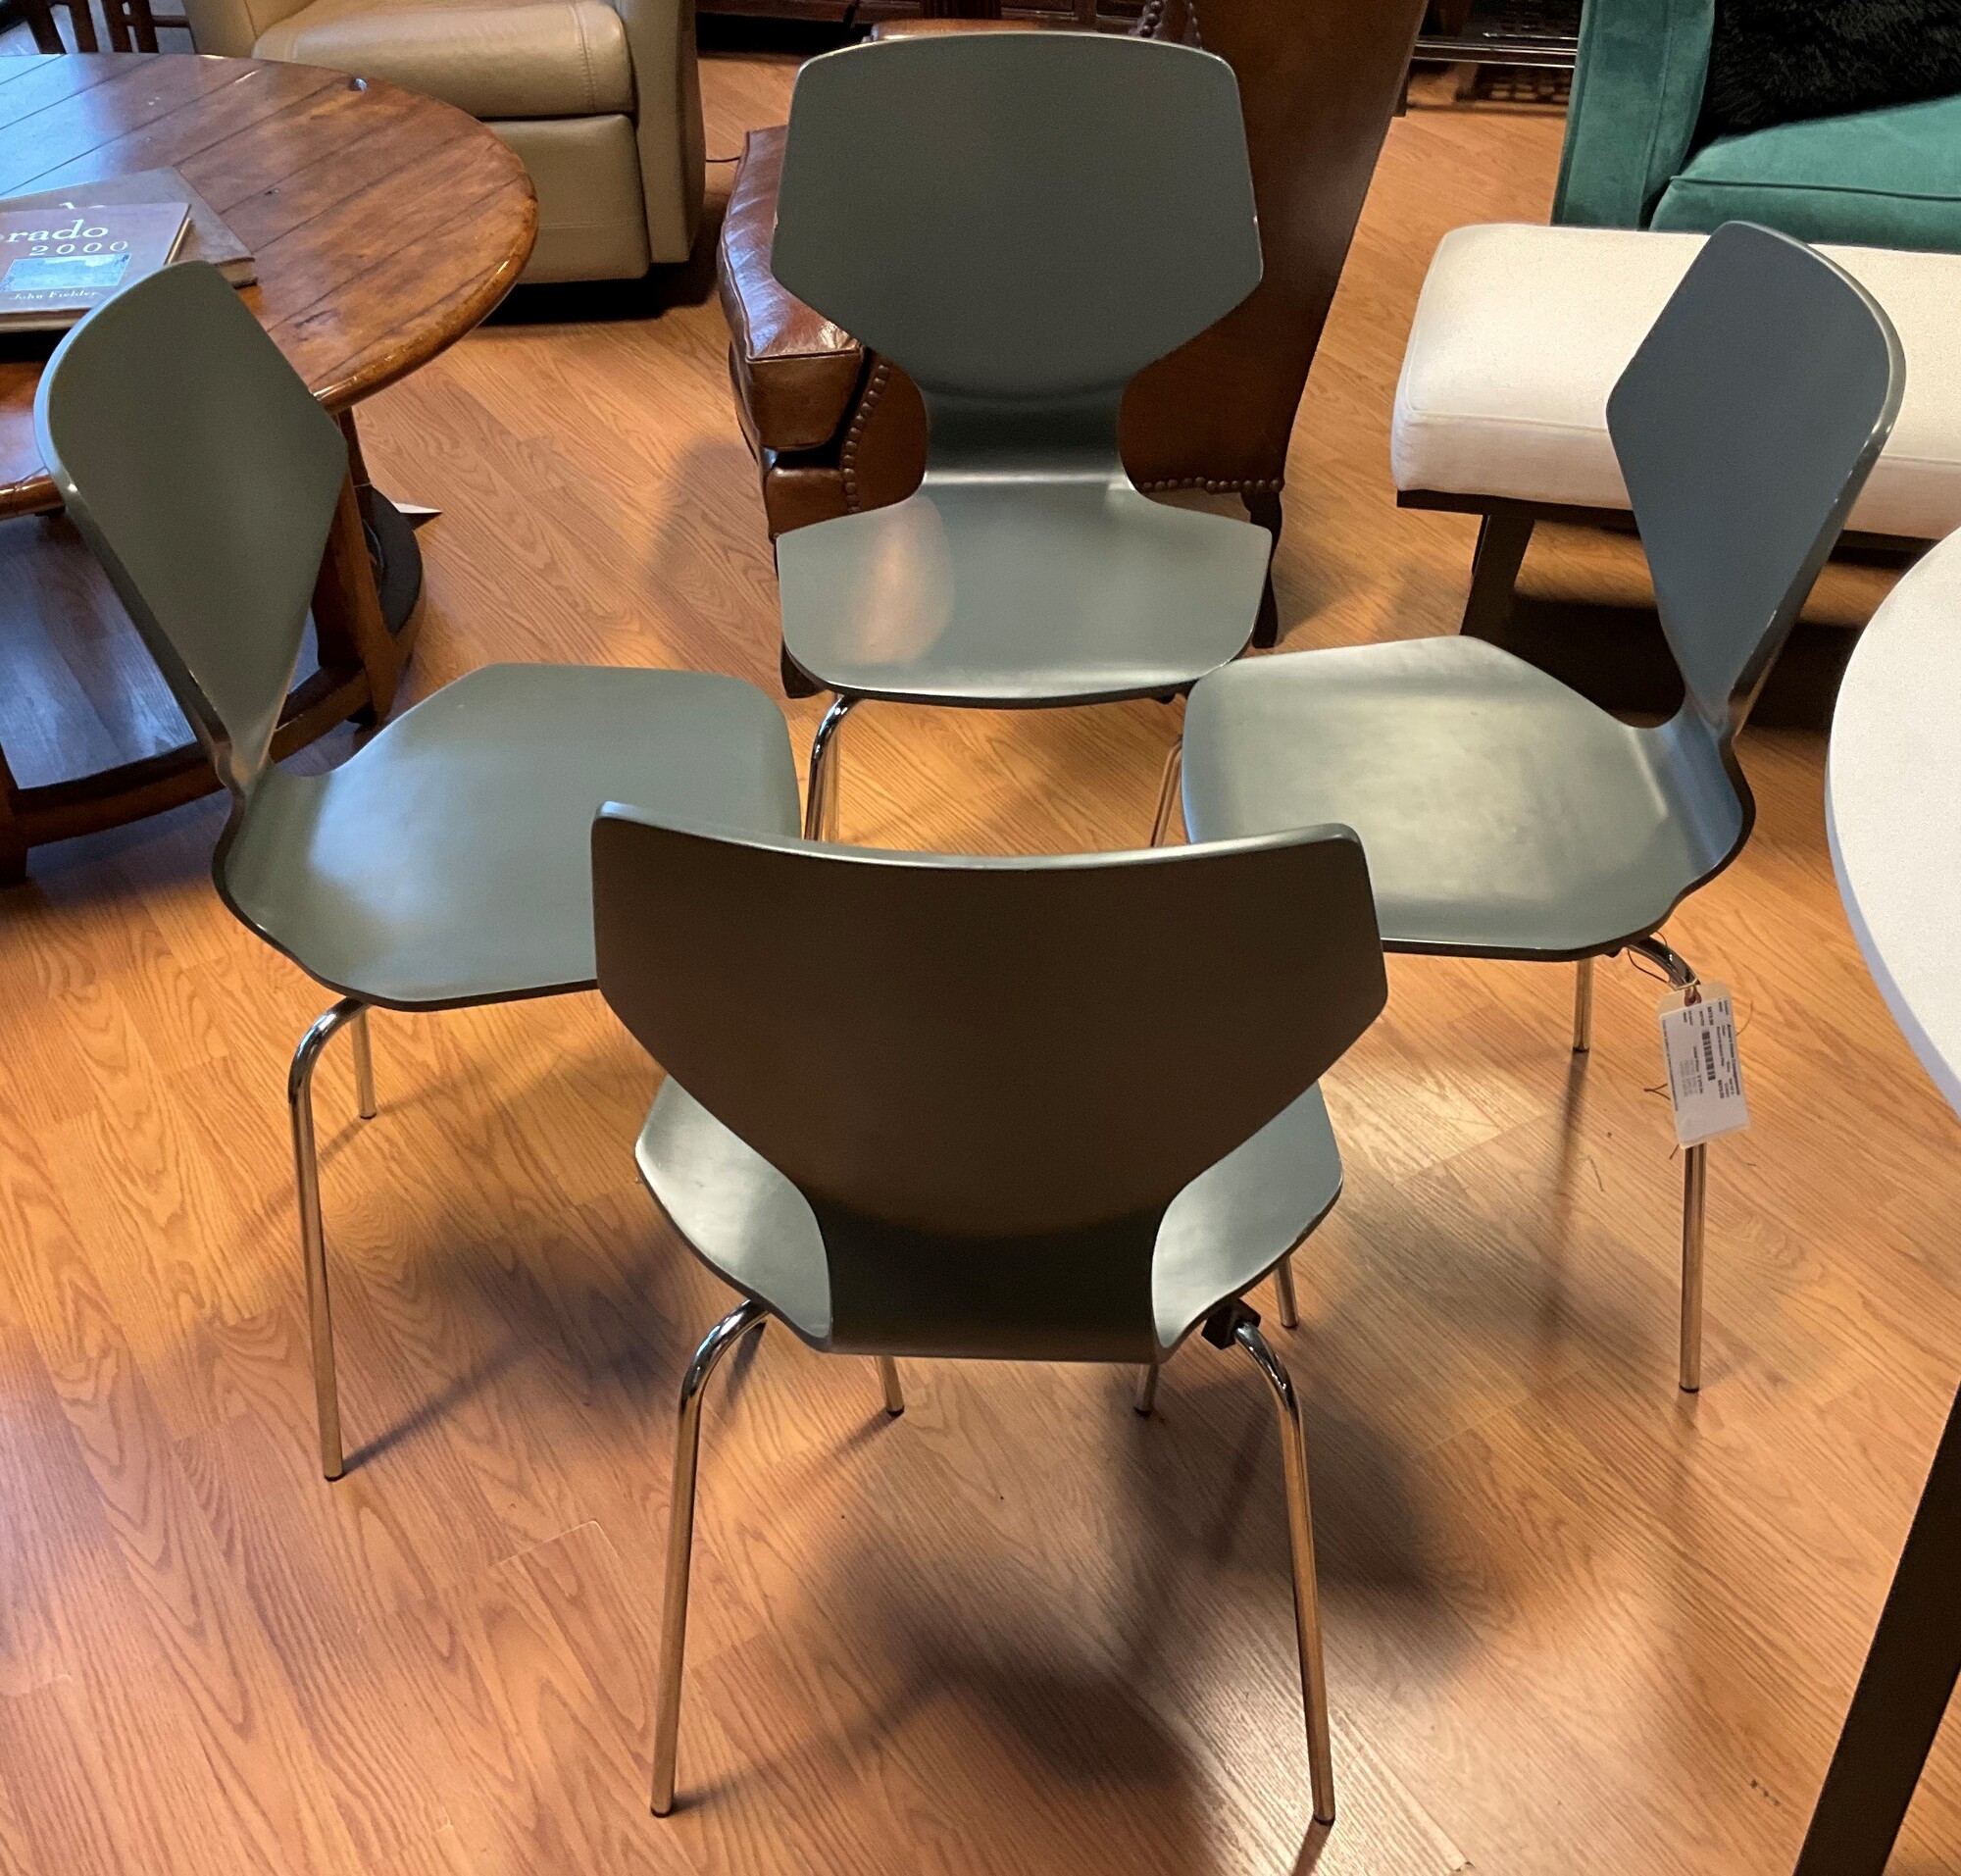 Room & Board Pike Chairs
Gray, Set Of 4
34in(H) 17.5in(W) 16in(D)